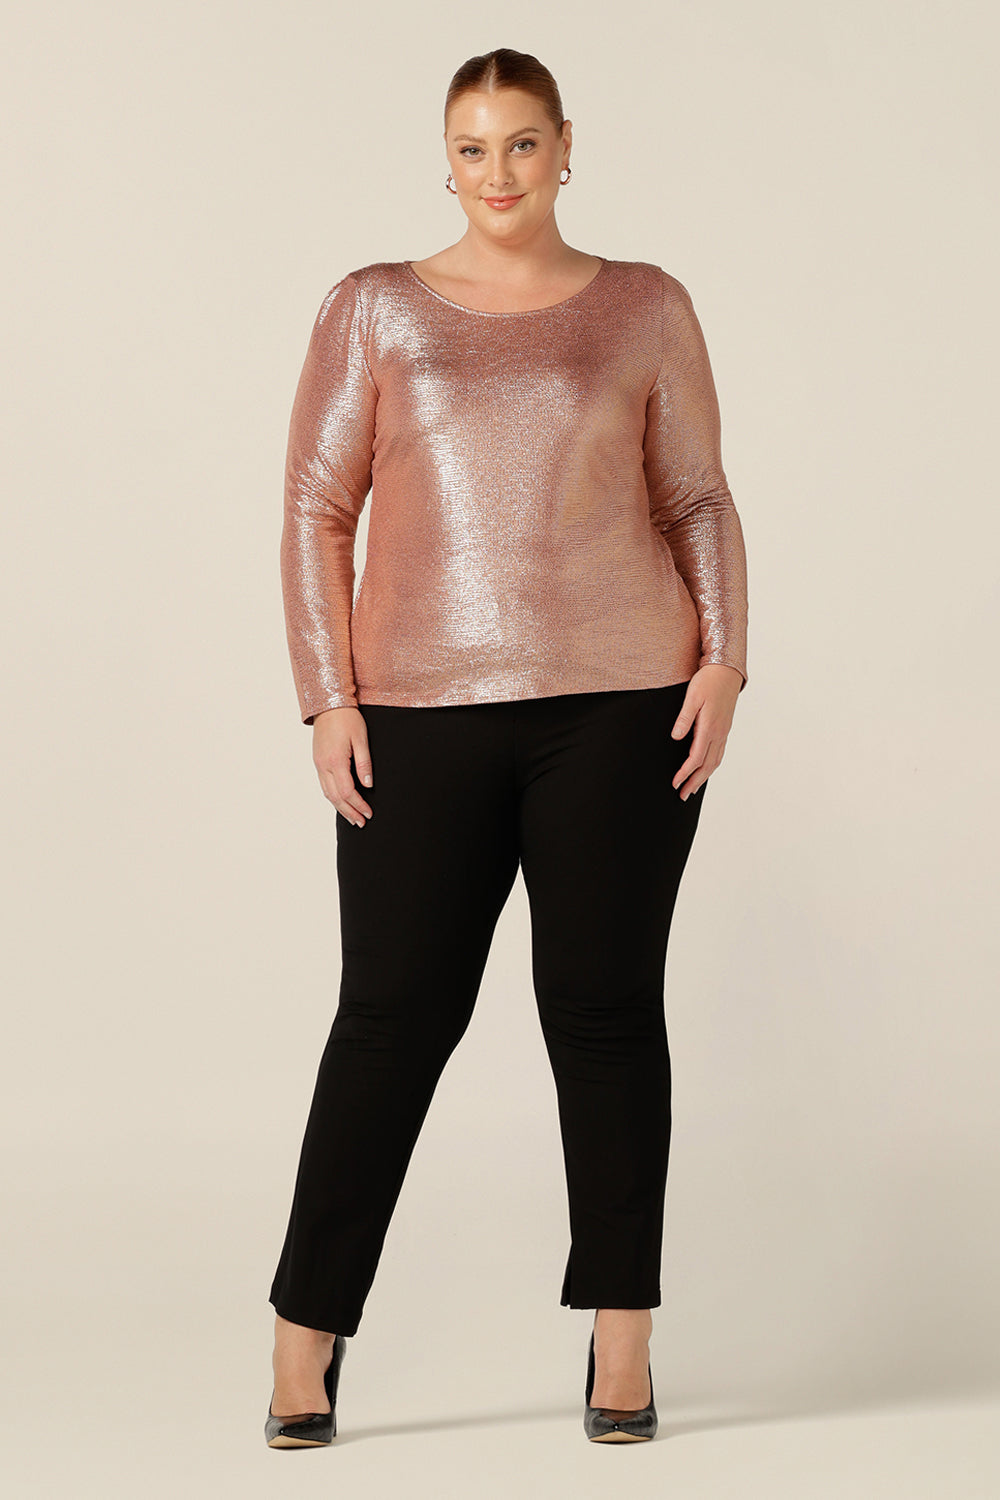 A fuller figure, size 18 woman wears a sparkly top  in shimmering pink jersey top. With a high scoop neck and long sleeves, this a modest eveningwear top that's great for plus size and 40 plus fashionable women. 